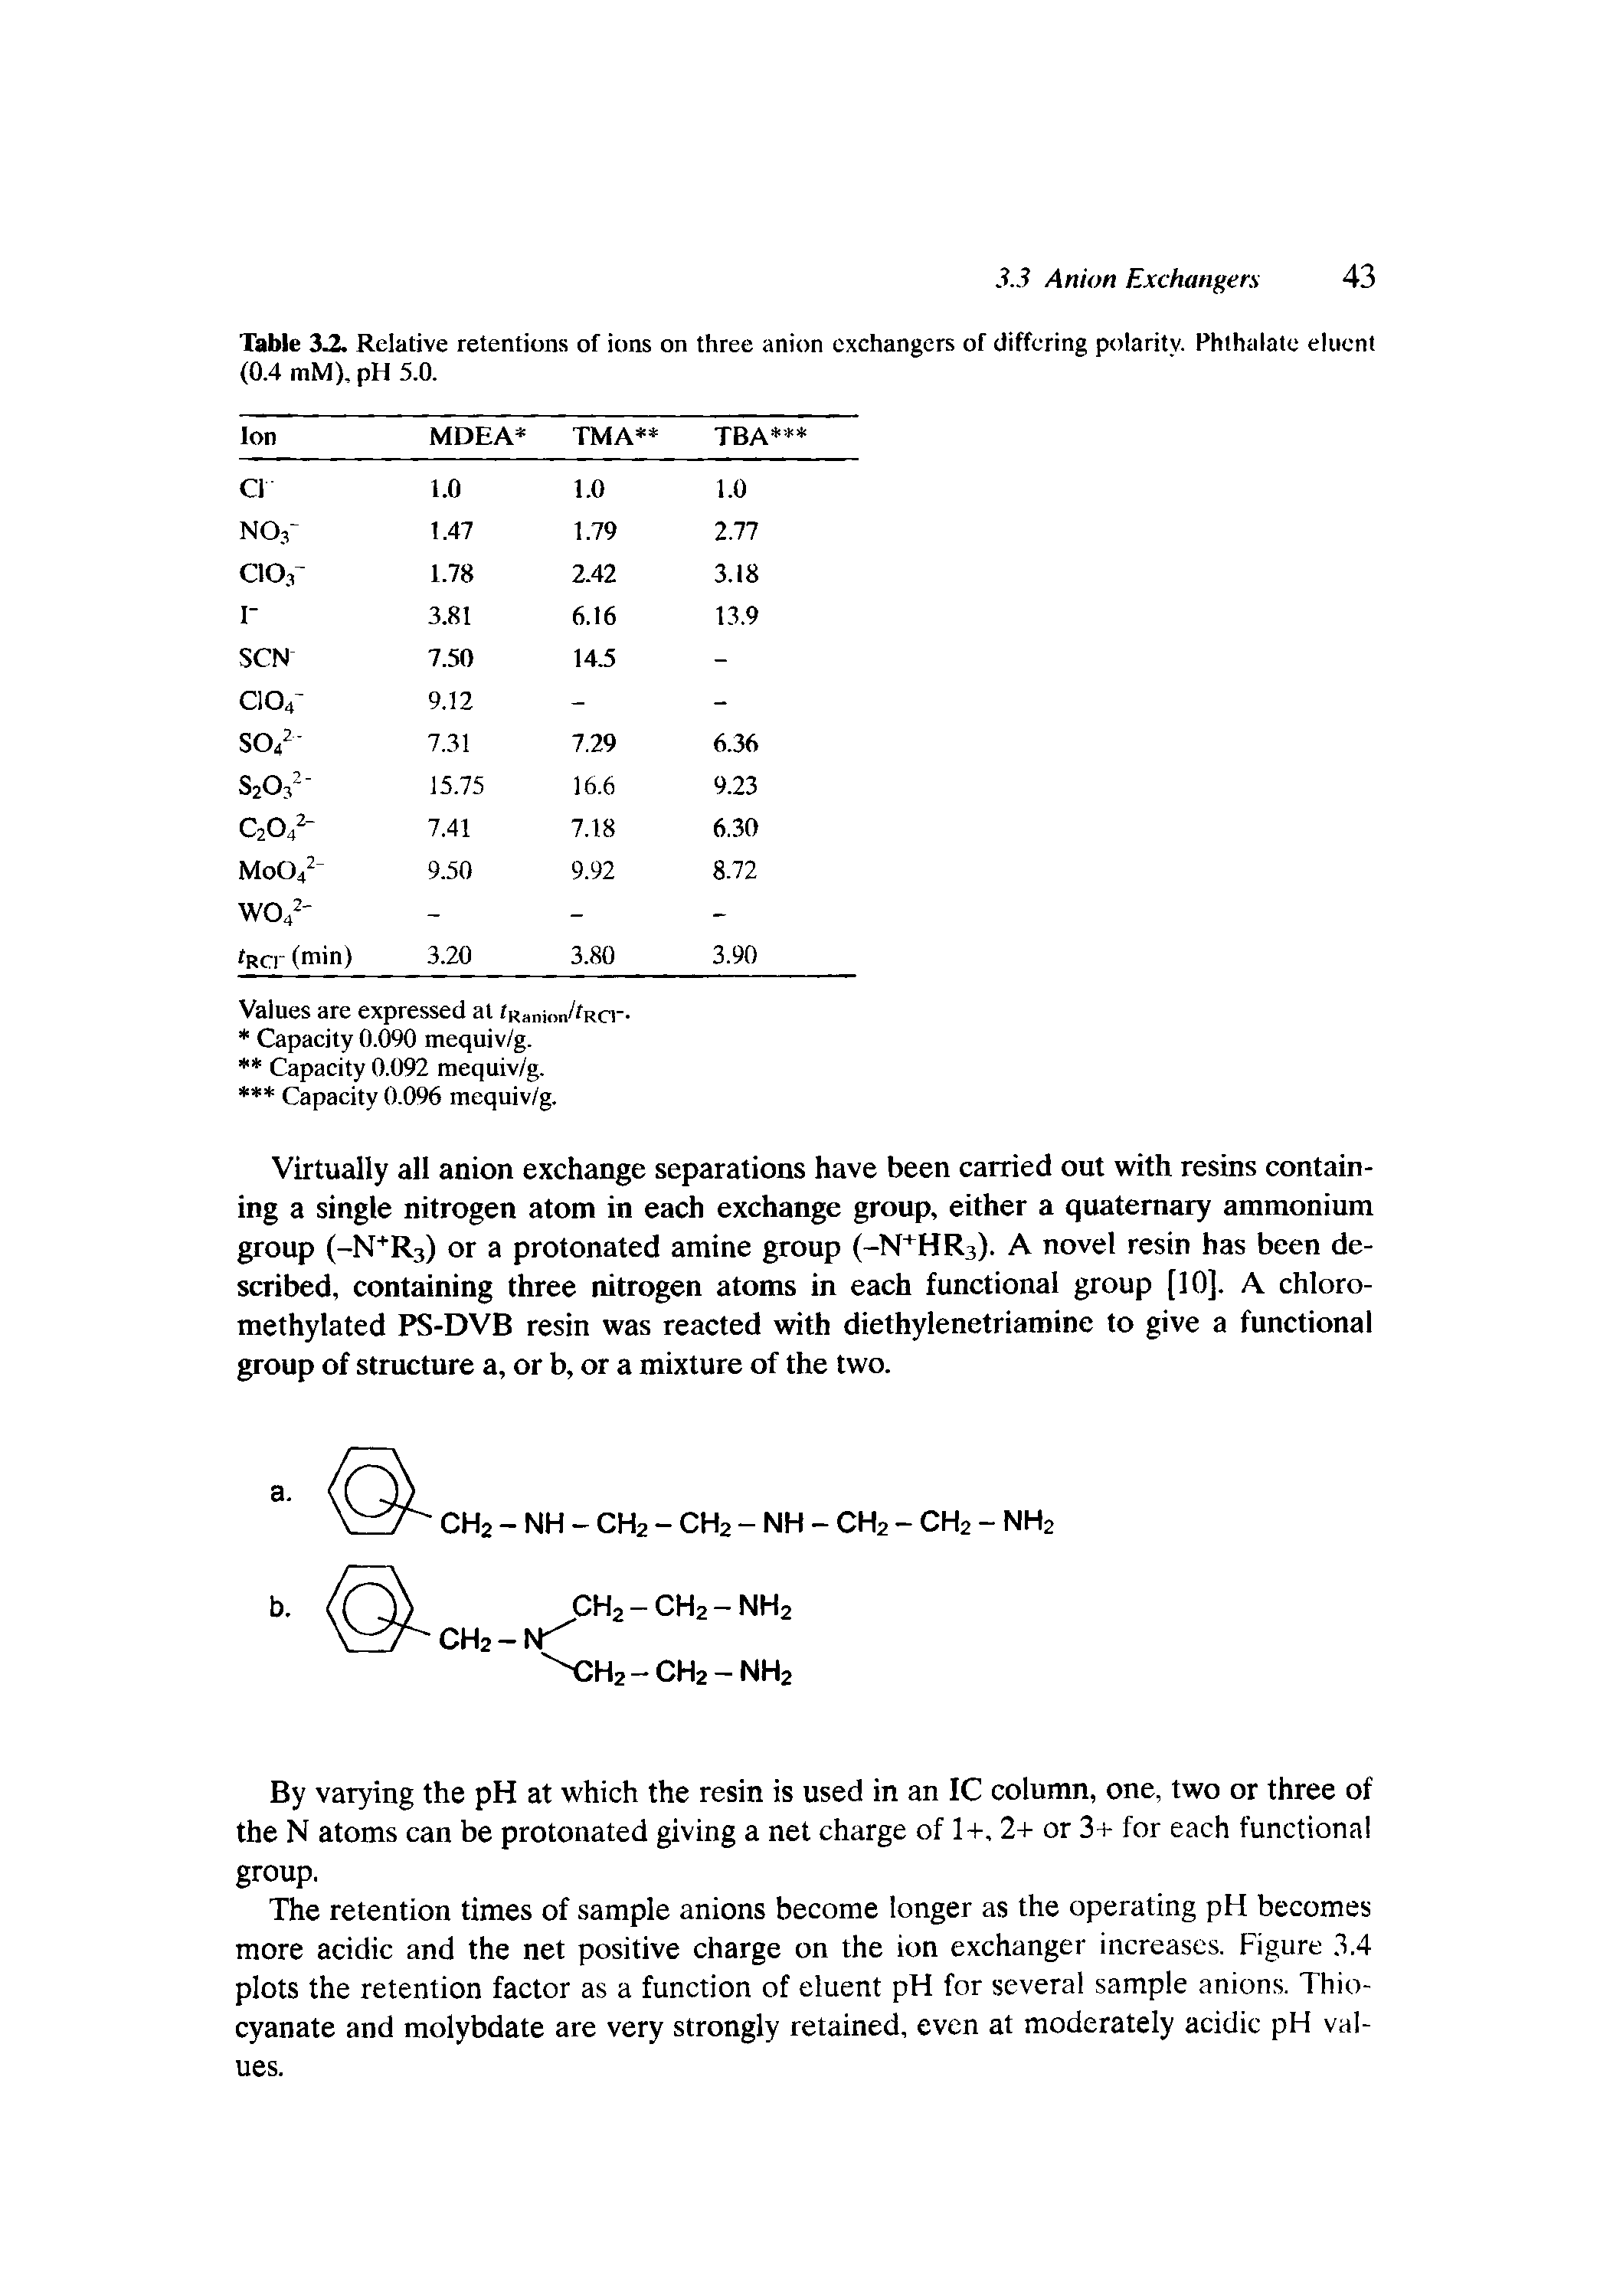 Table 3 Relative retentions of ions on three anion exchangers of differing polaritv. Phthalatc eluent (0.4 mM), pH 5.0.